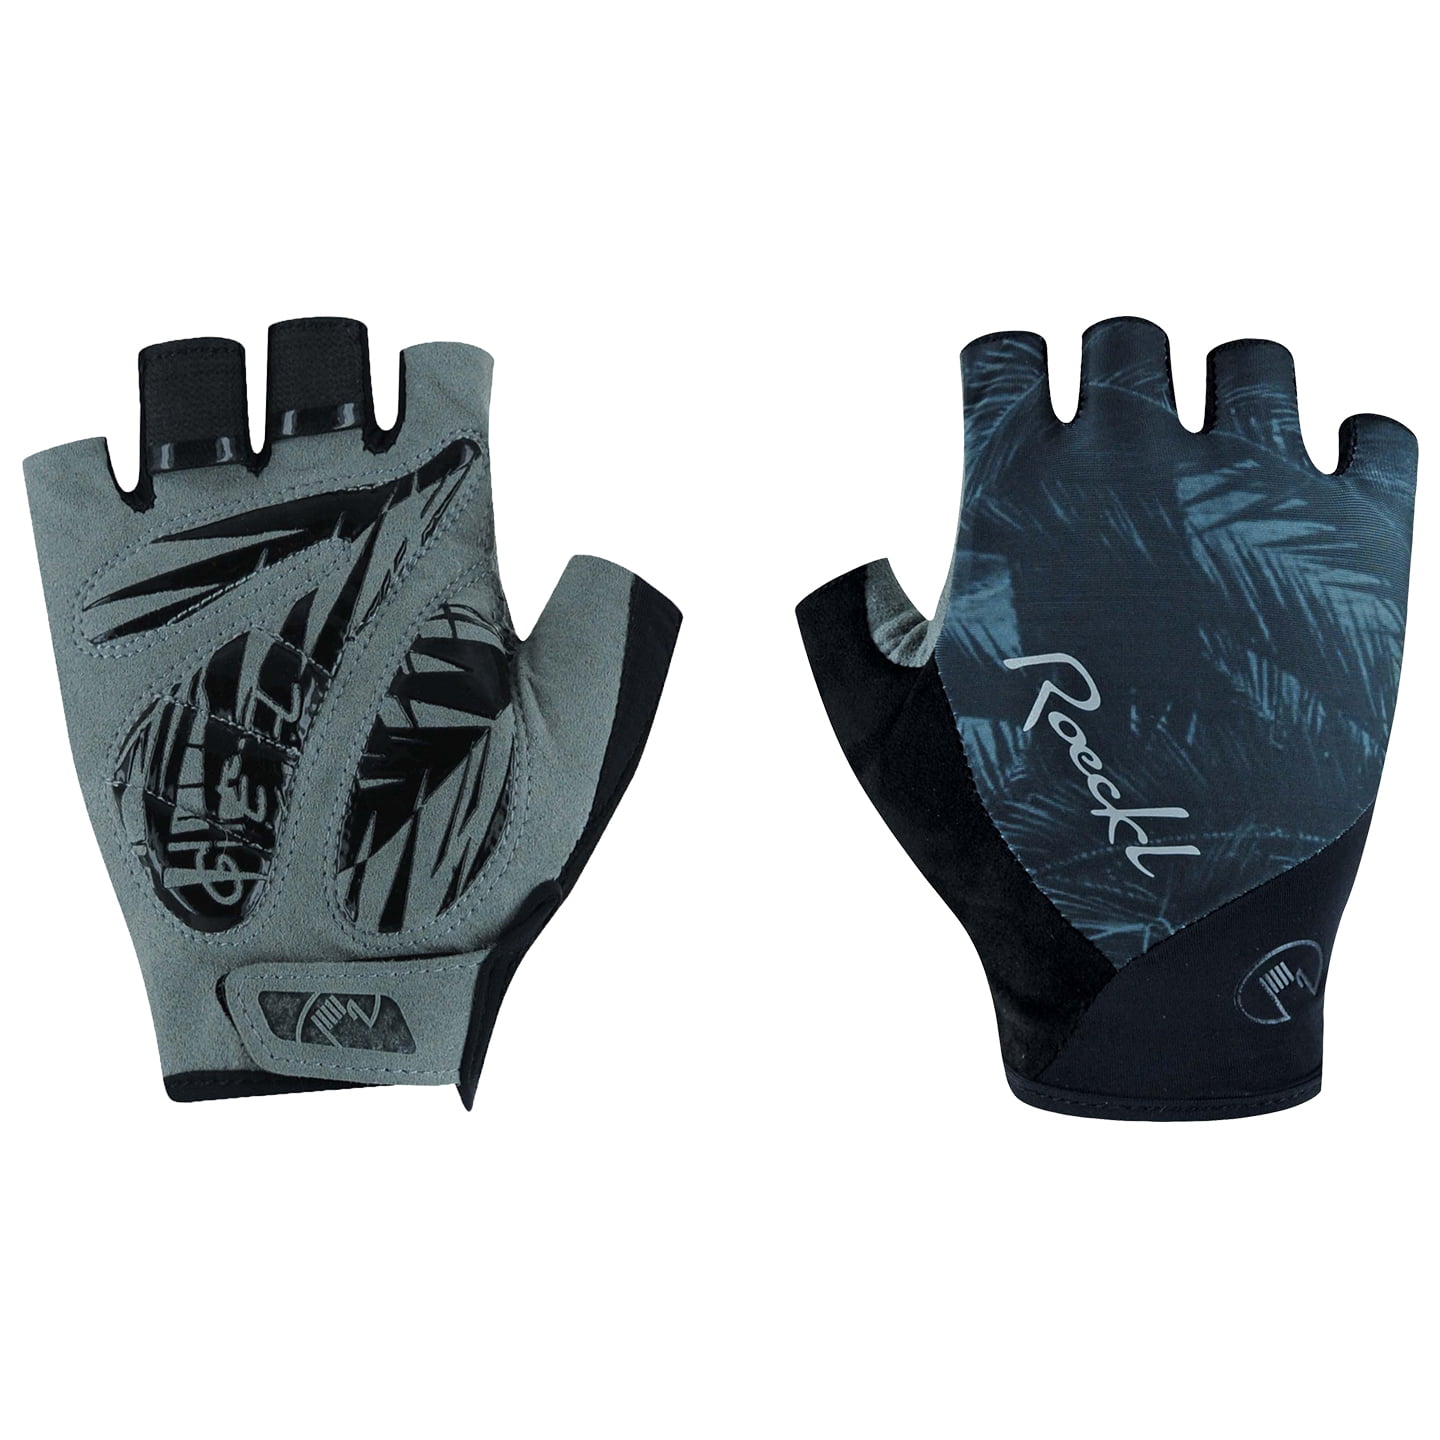 ROECKL Danis Women’s Gloves Women’s Cycling Gloves, size 7, MTB gloves, Cycling apparel